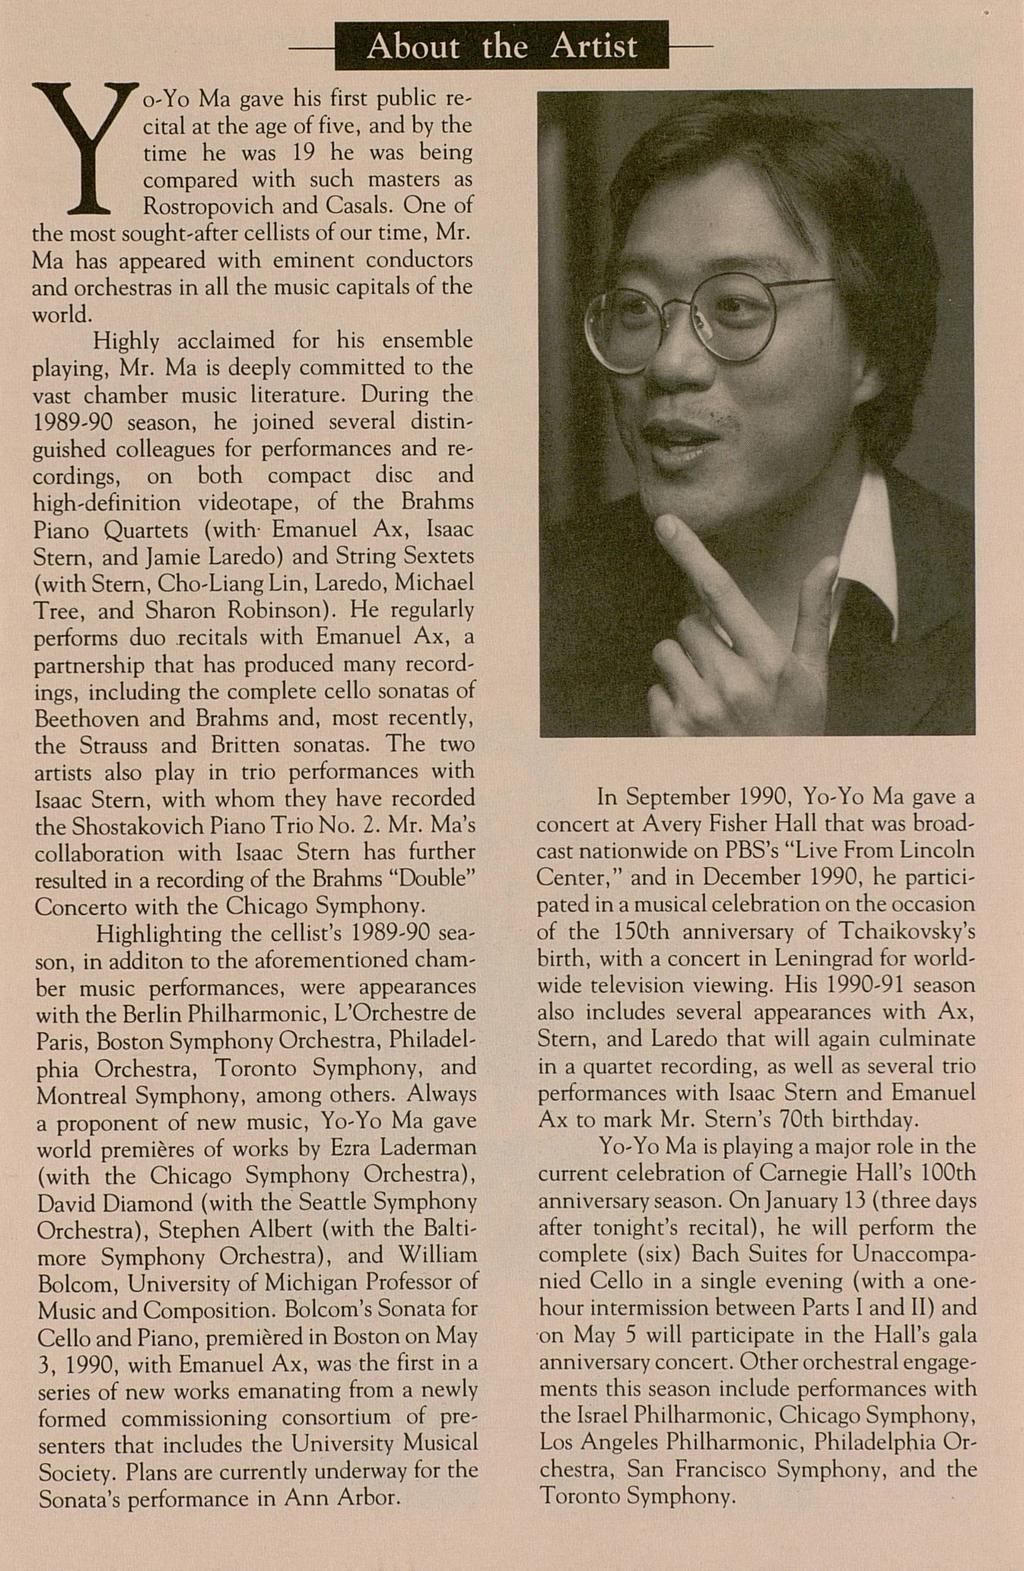 Yo-Yo Ma gave his first public recital at the age of five, and by the time he was 19 he was being compared with such masters as Rostropovich and Casals.